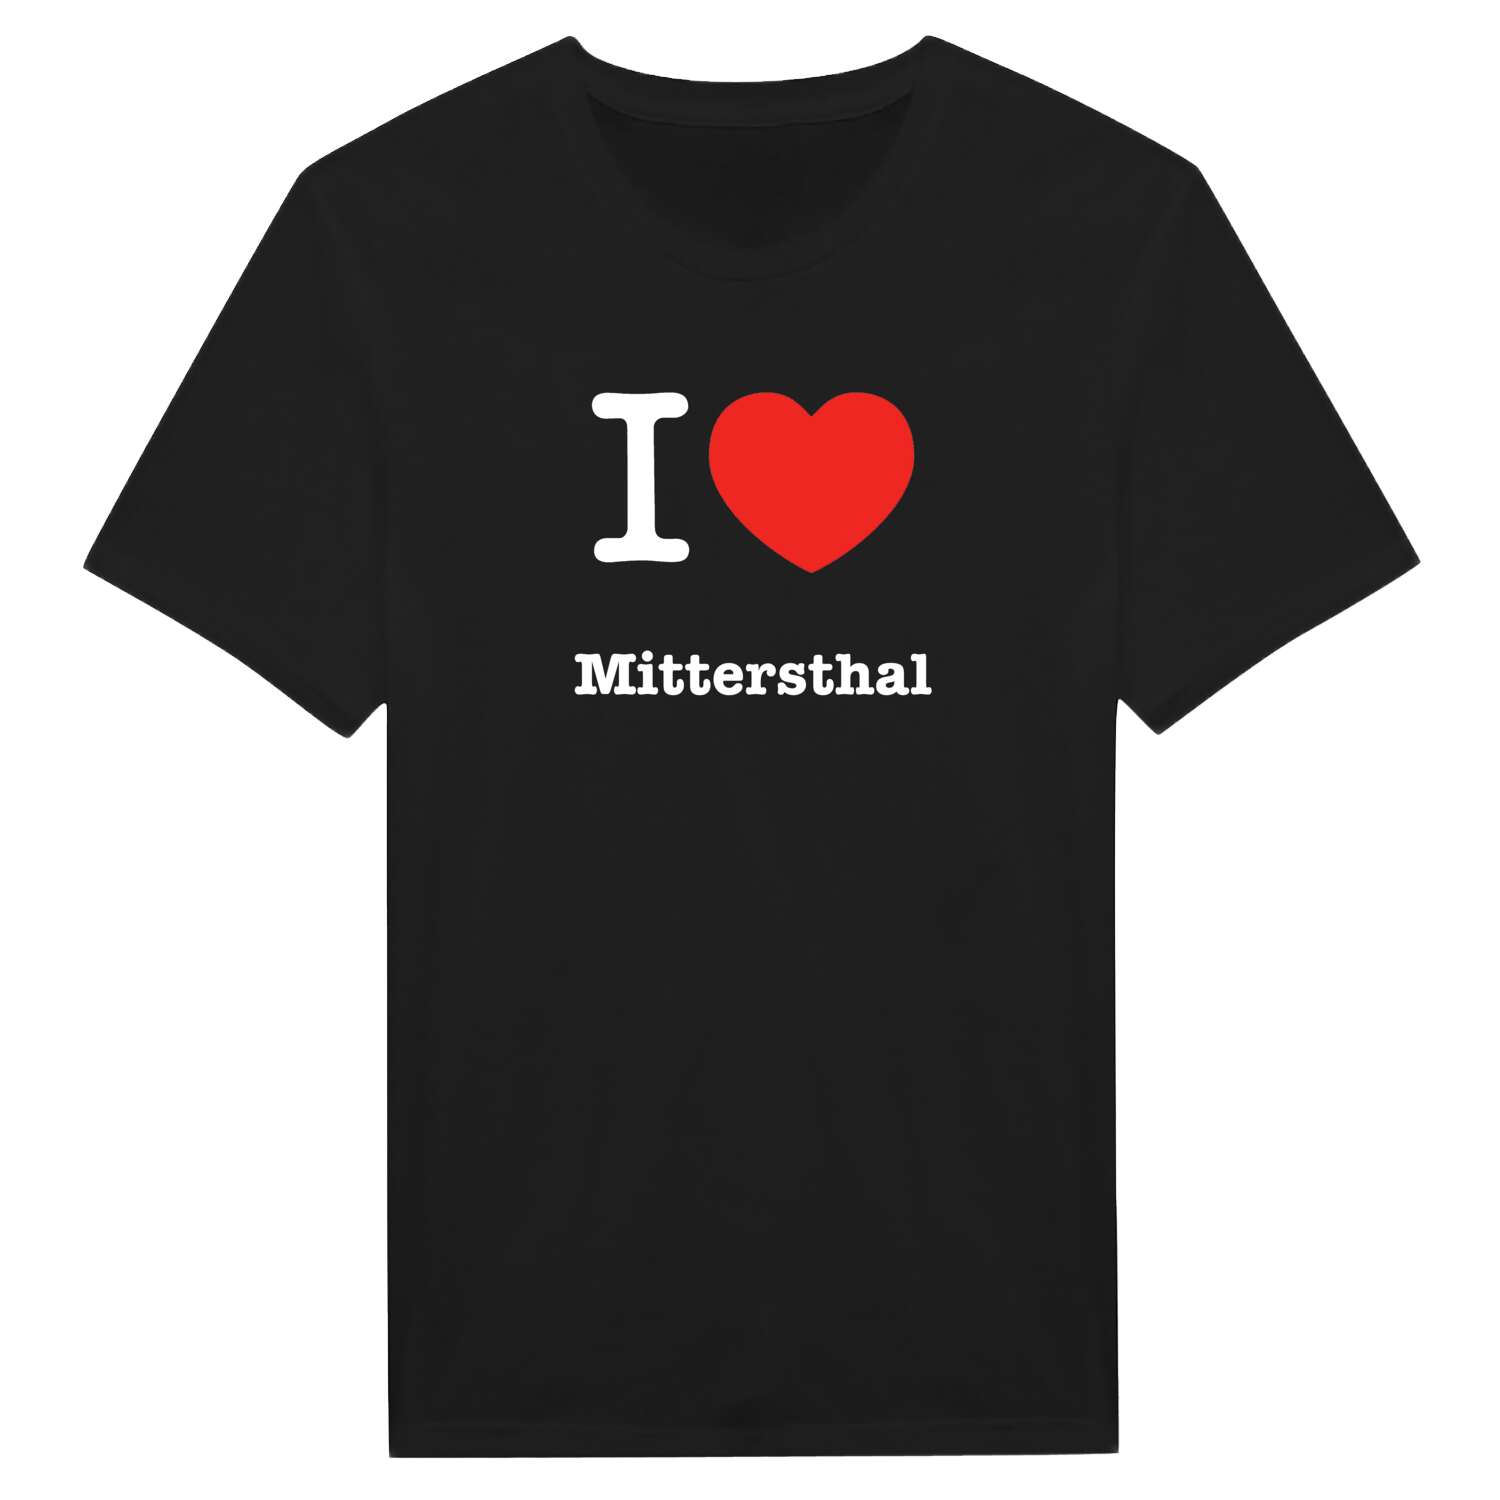 Mittersthal T-Shirt »I love«